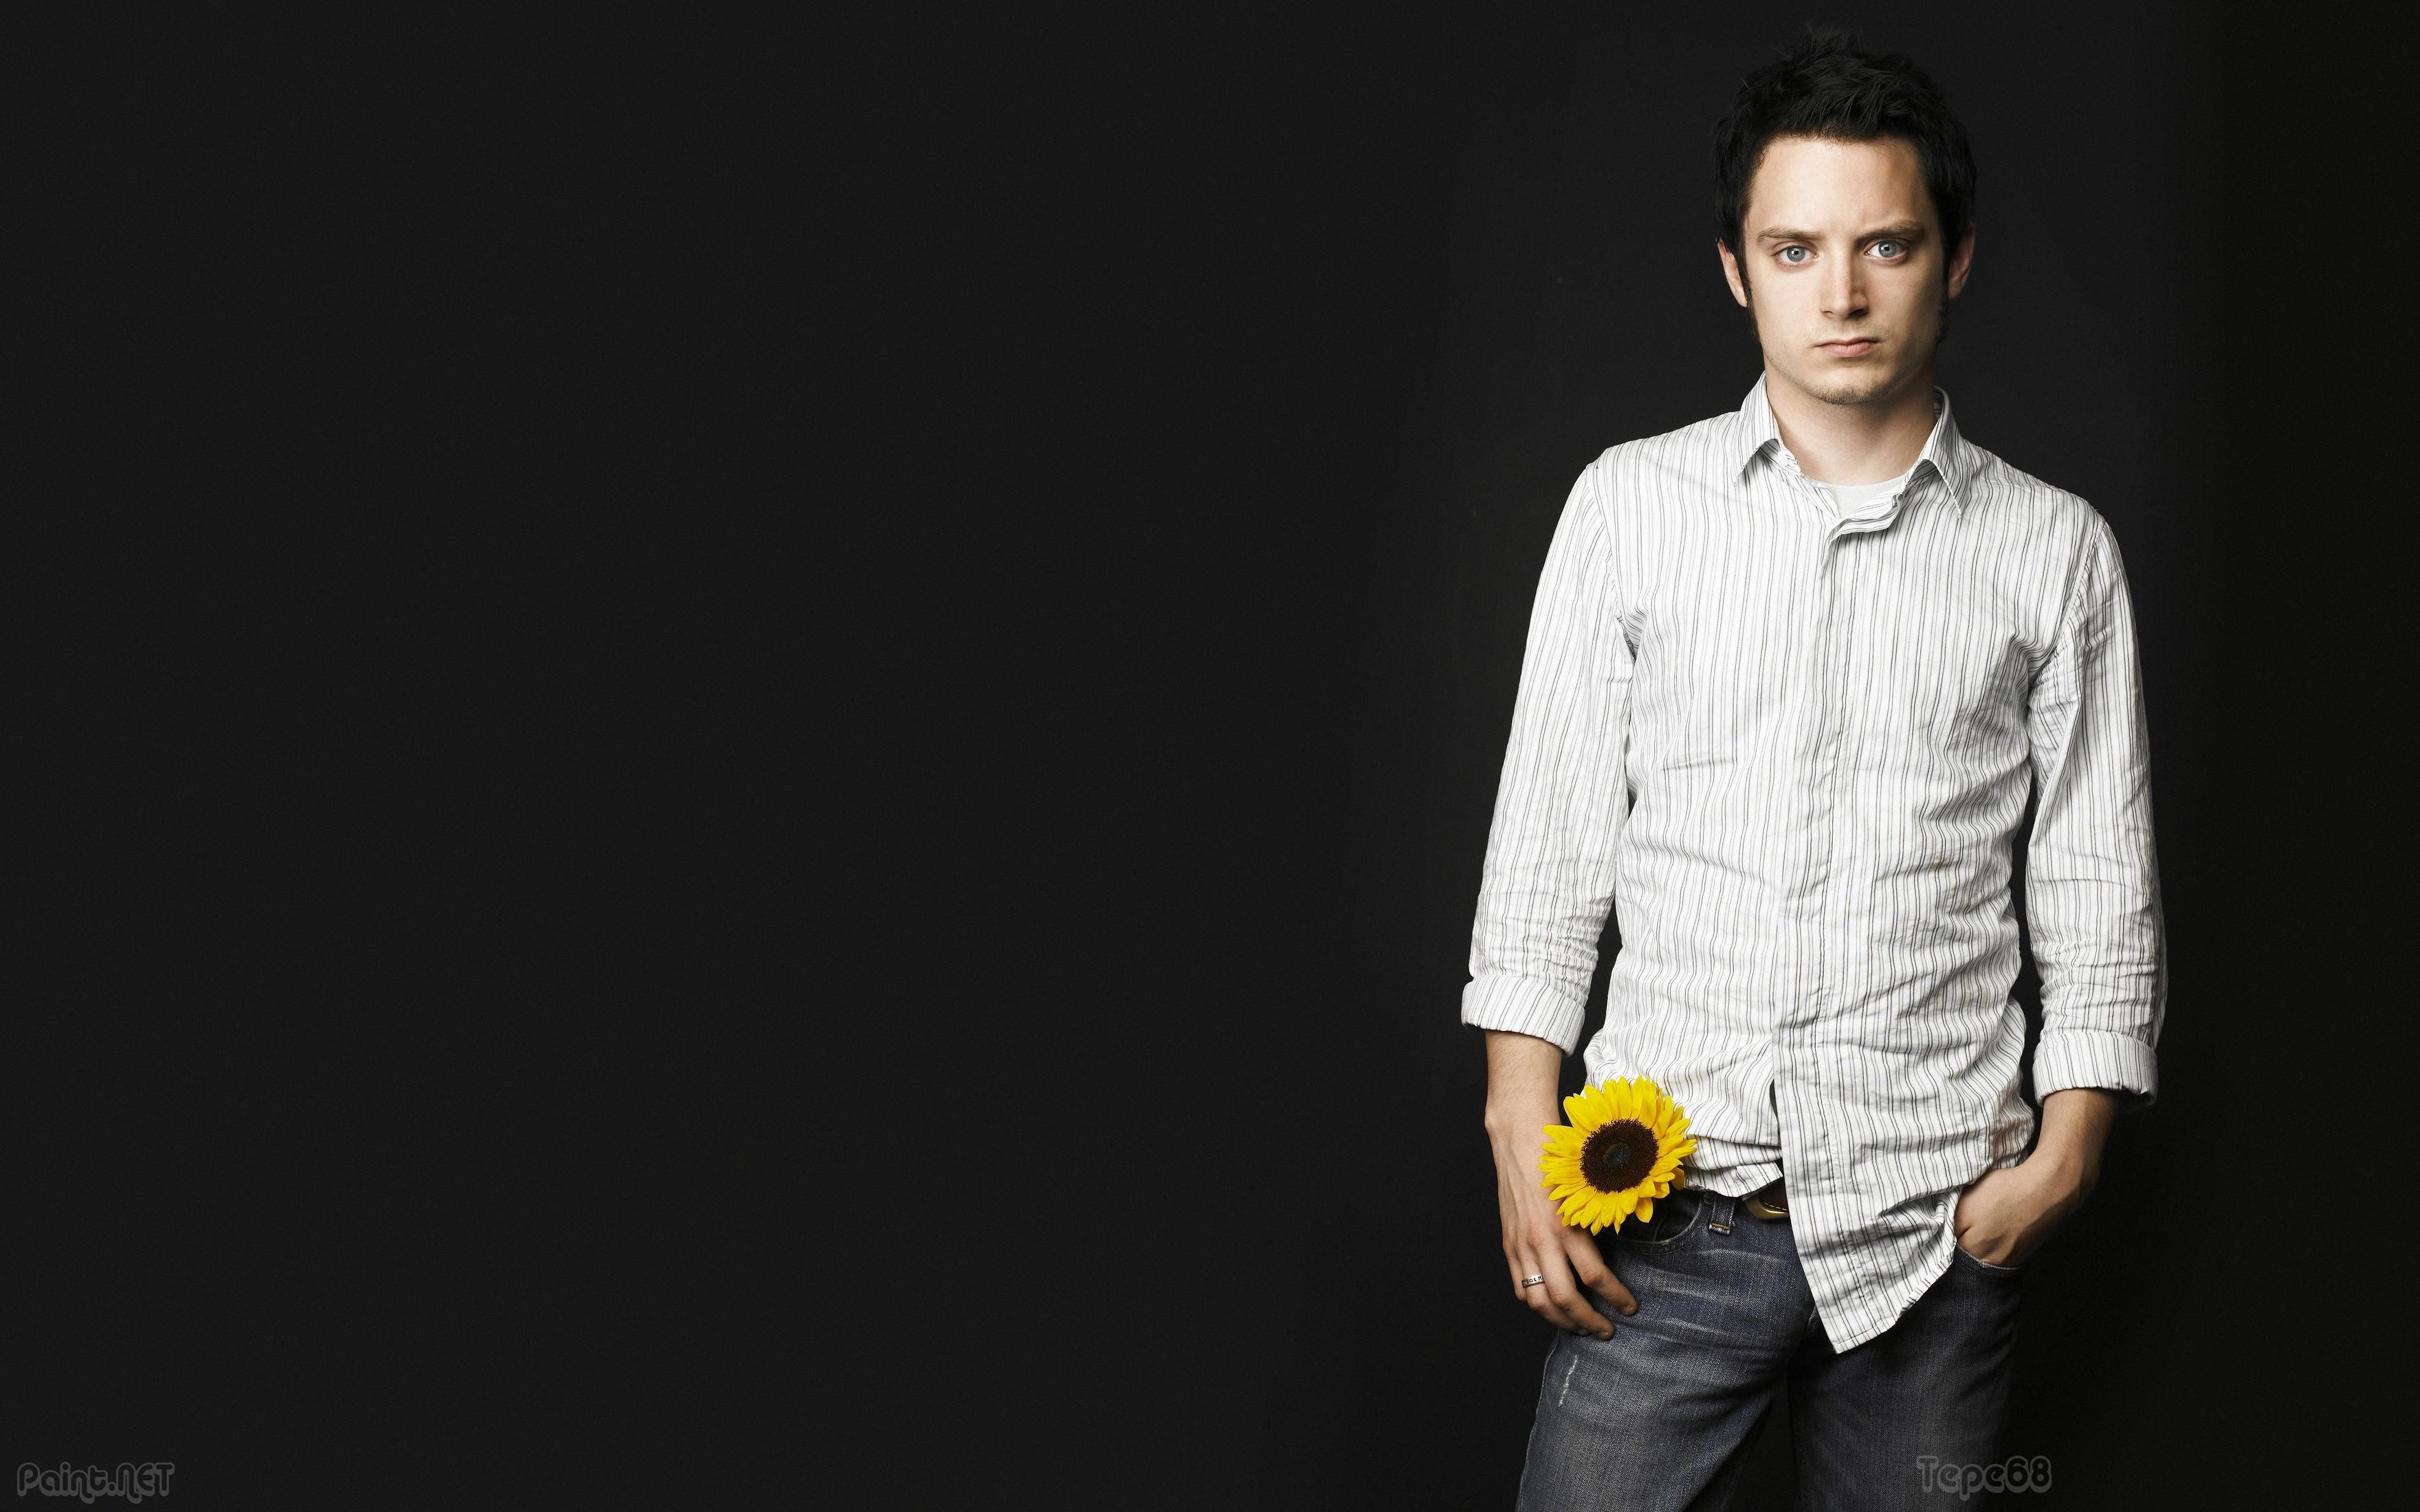 Elijah Wood Wallpaper High Resolution and Quality Download